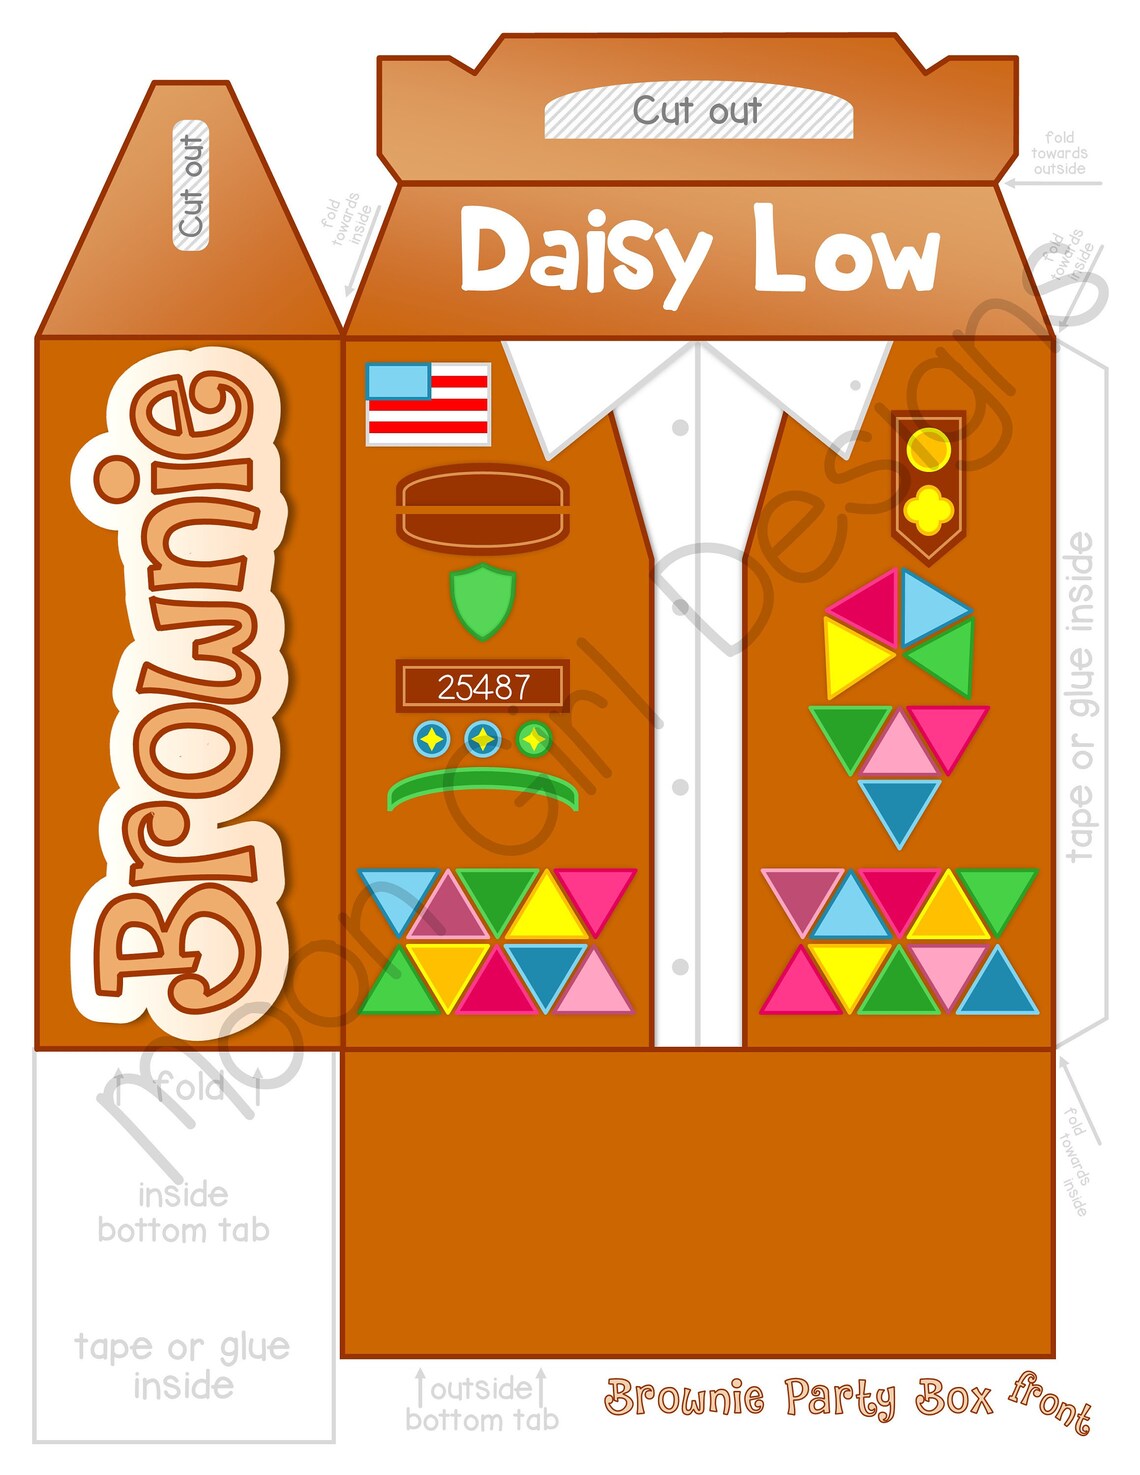 Girl Scout Brownie Party Gable Box Printable Template Cut Out | Etsy